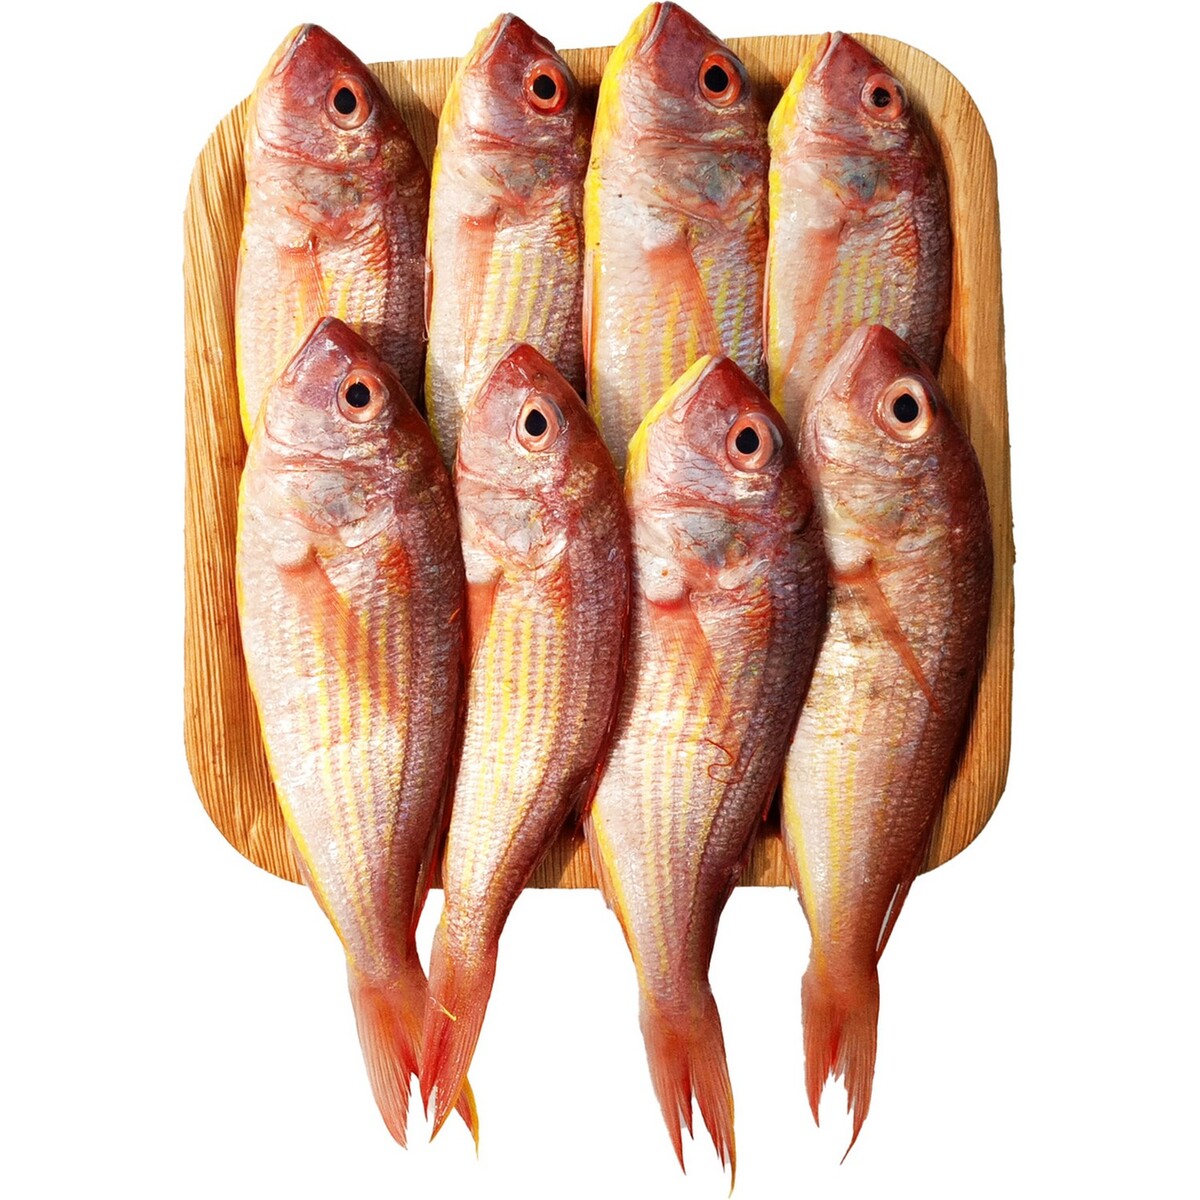 Kilimeen Small Fish Approximate 1.05kg